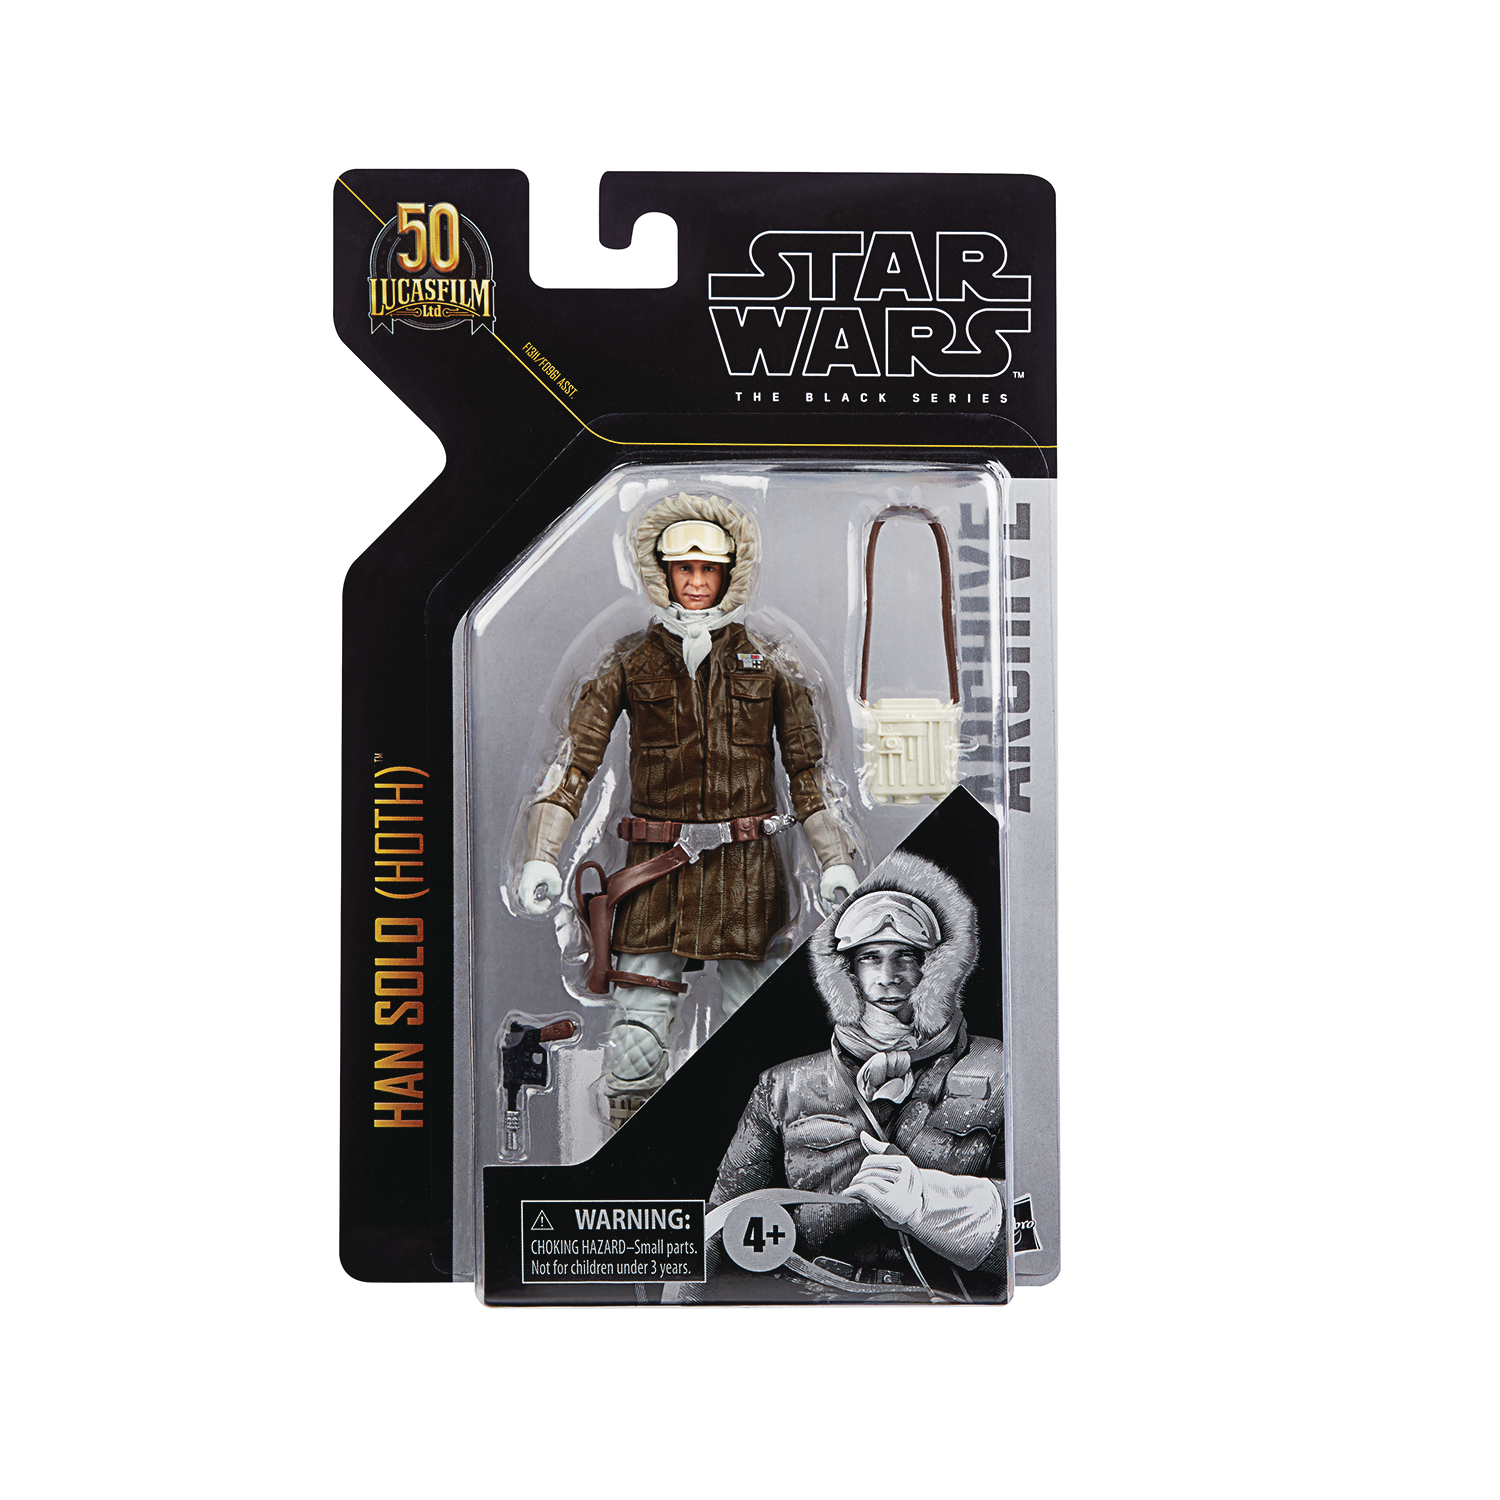 Star Wars Black Archives 6 Inch Hoth Han Solo Action Figure Case